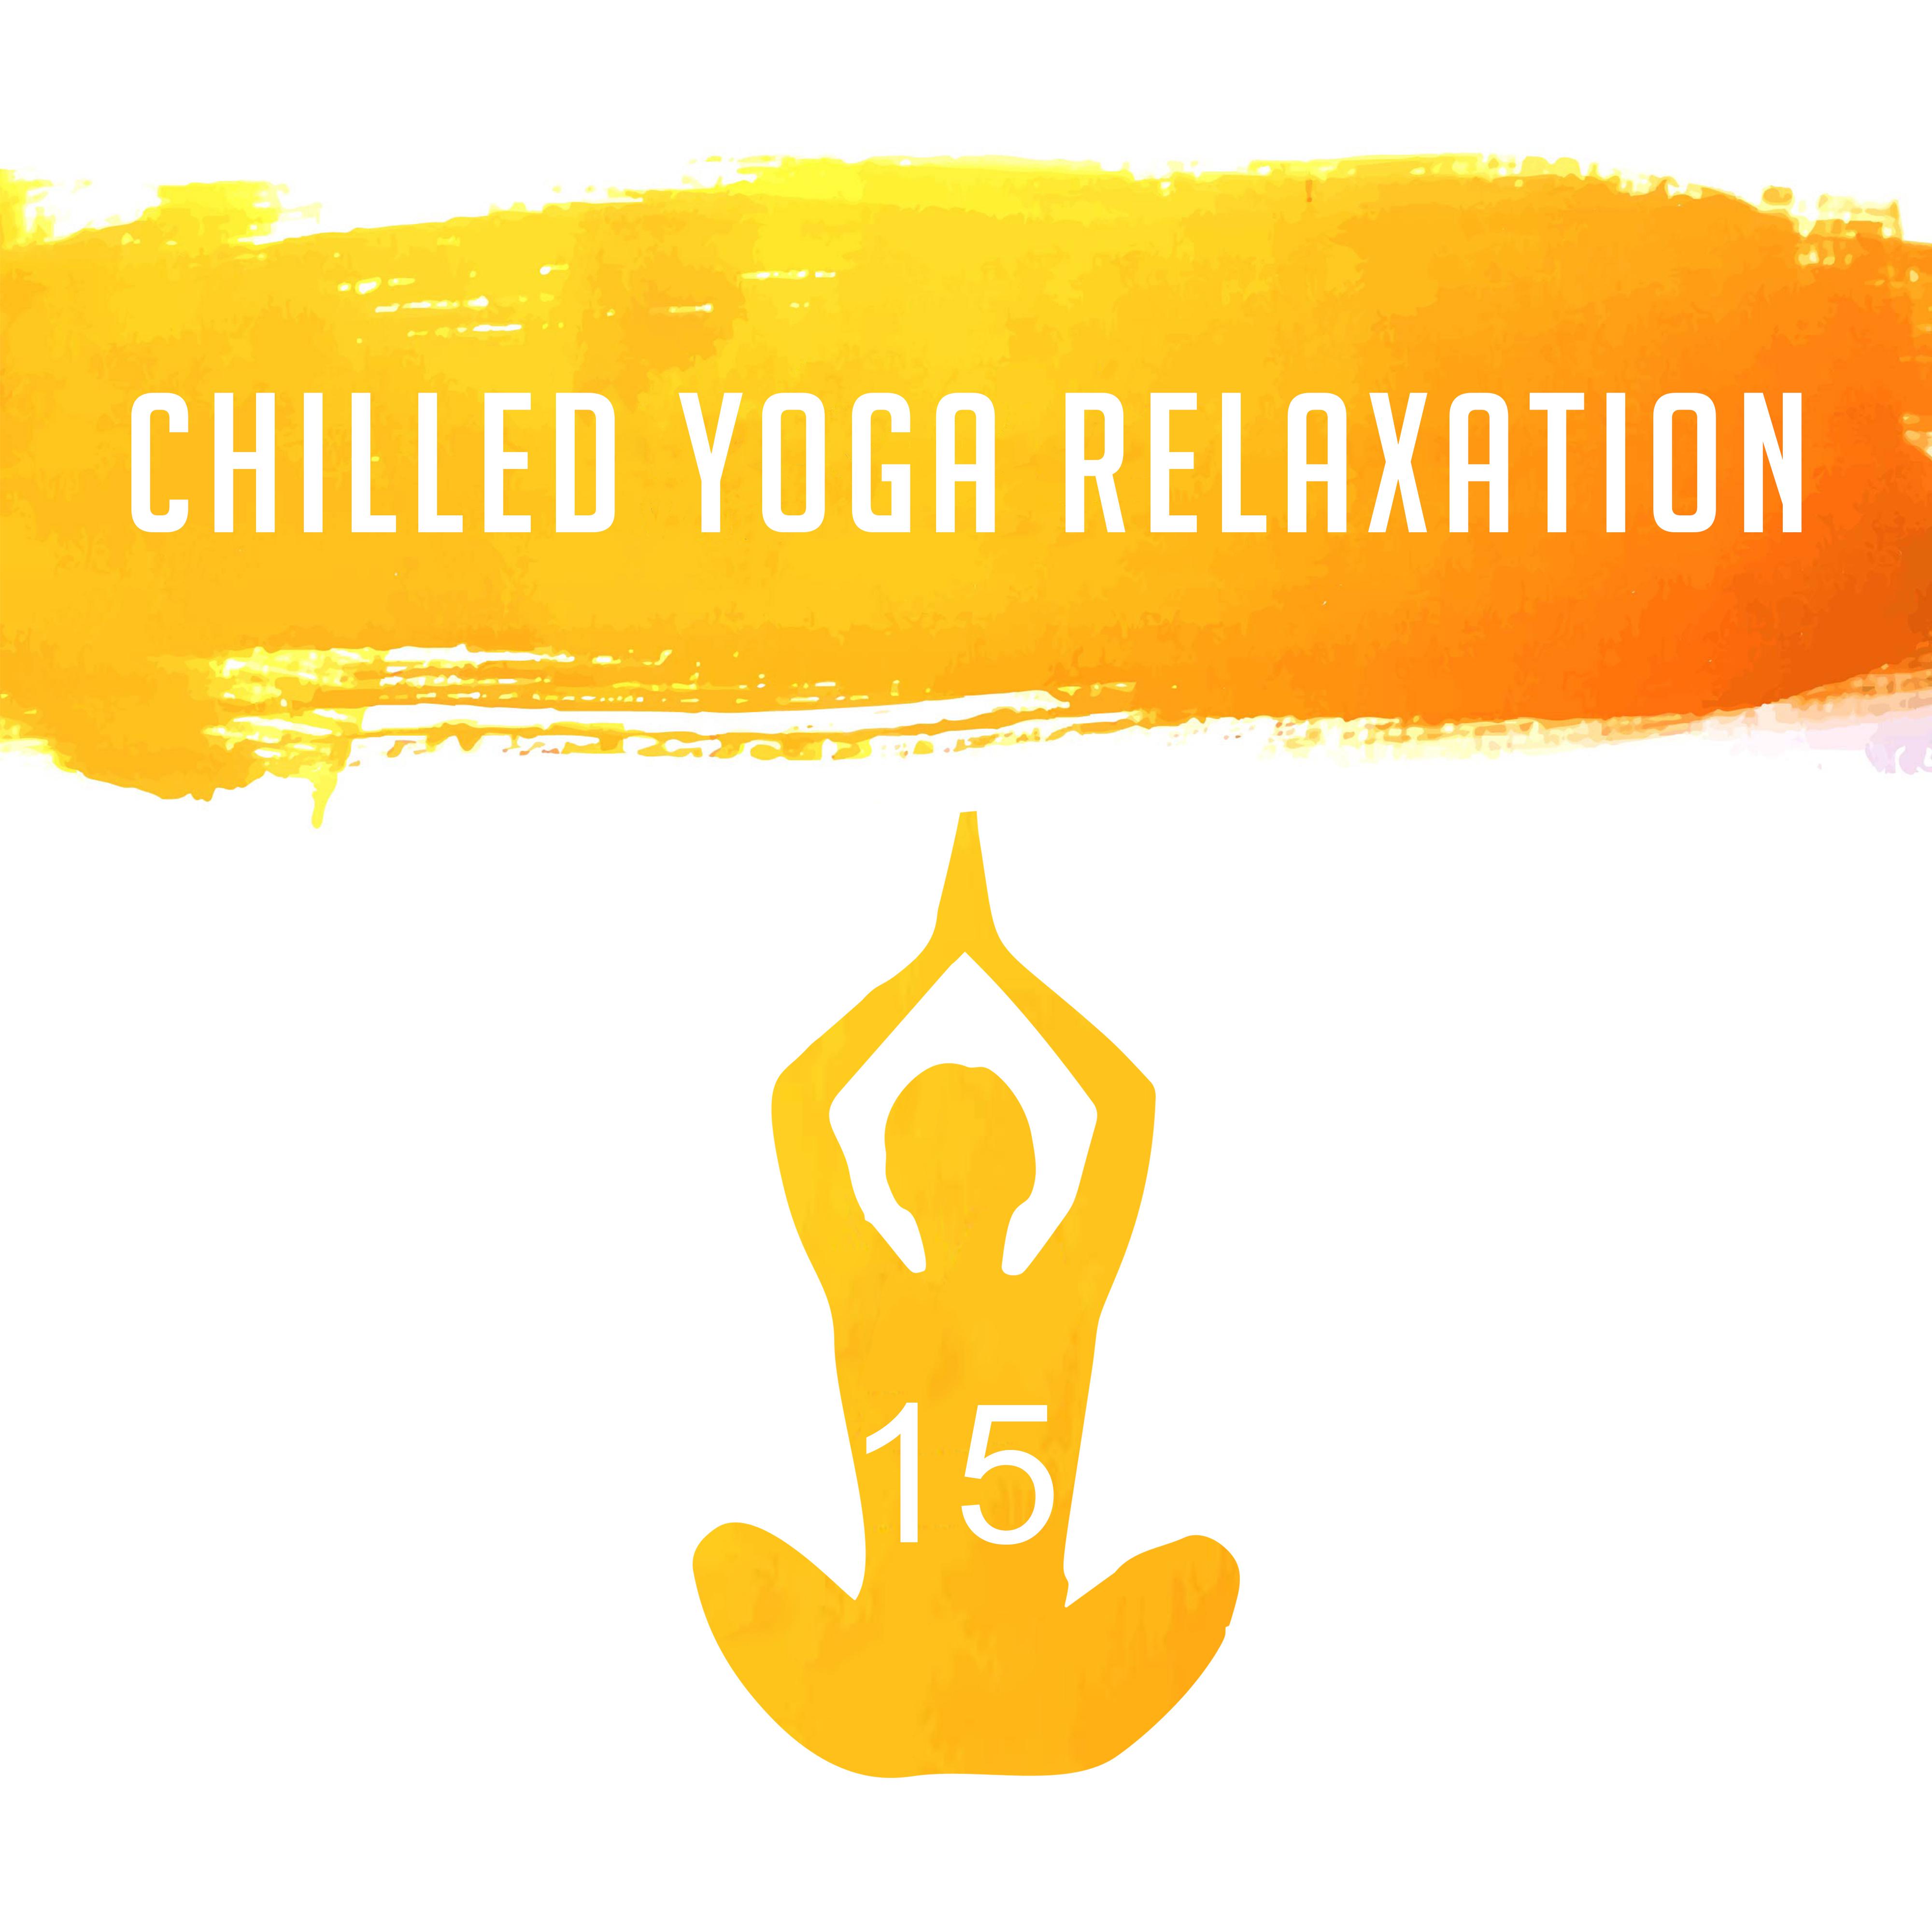 15 Chilled Yoga Relaxation